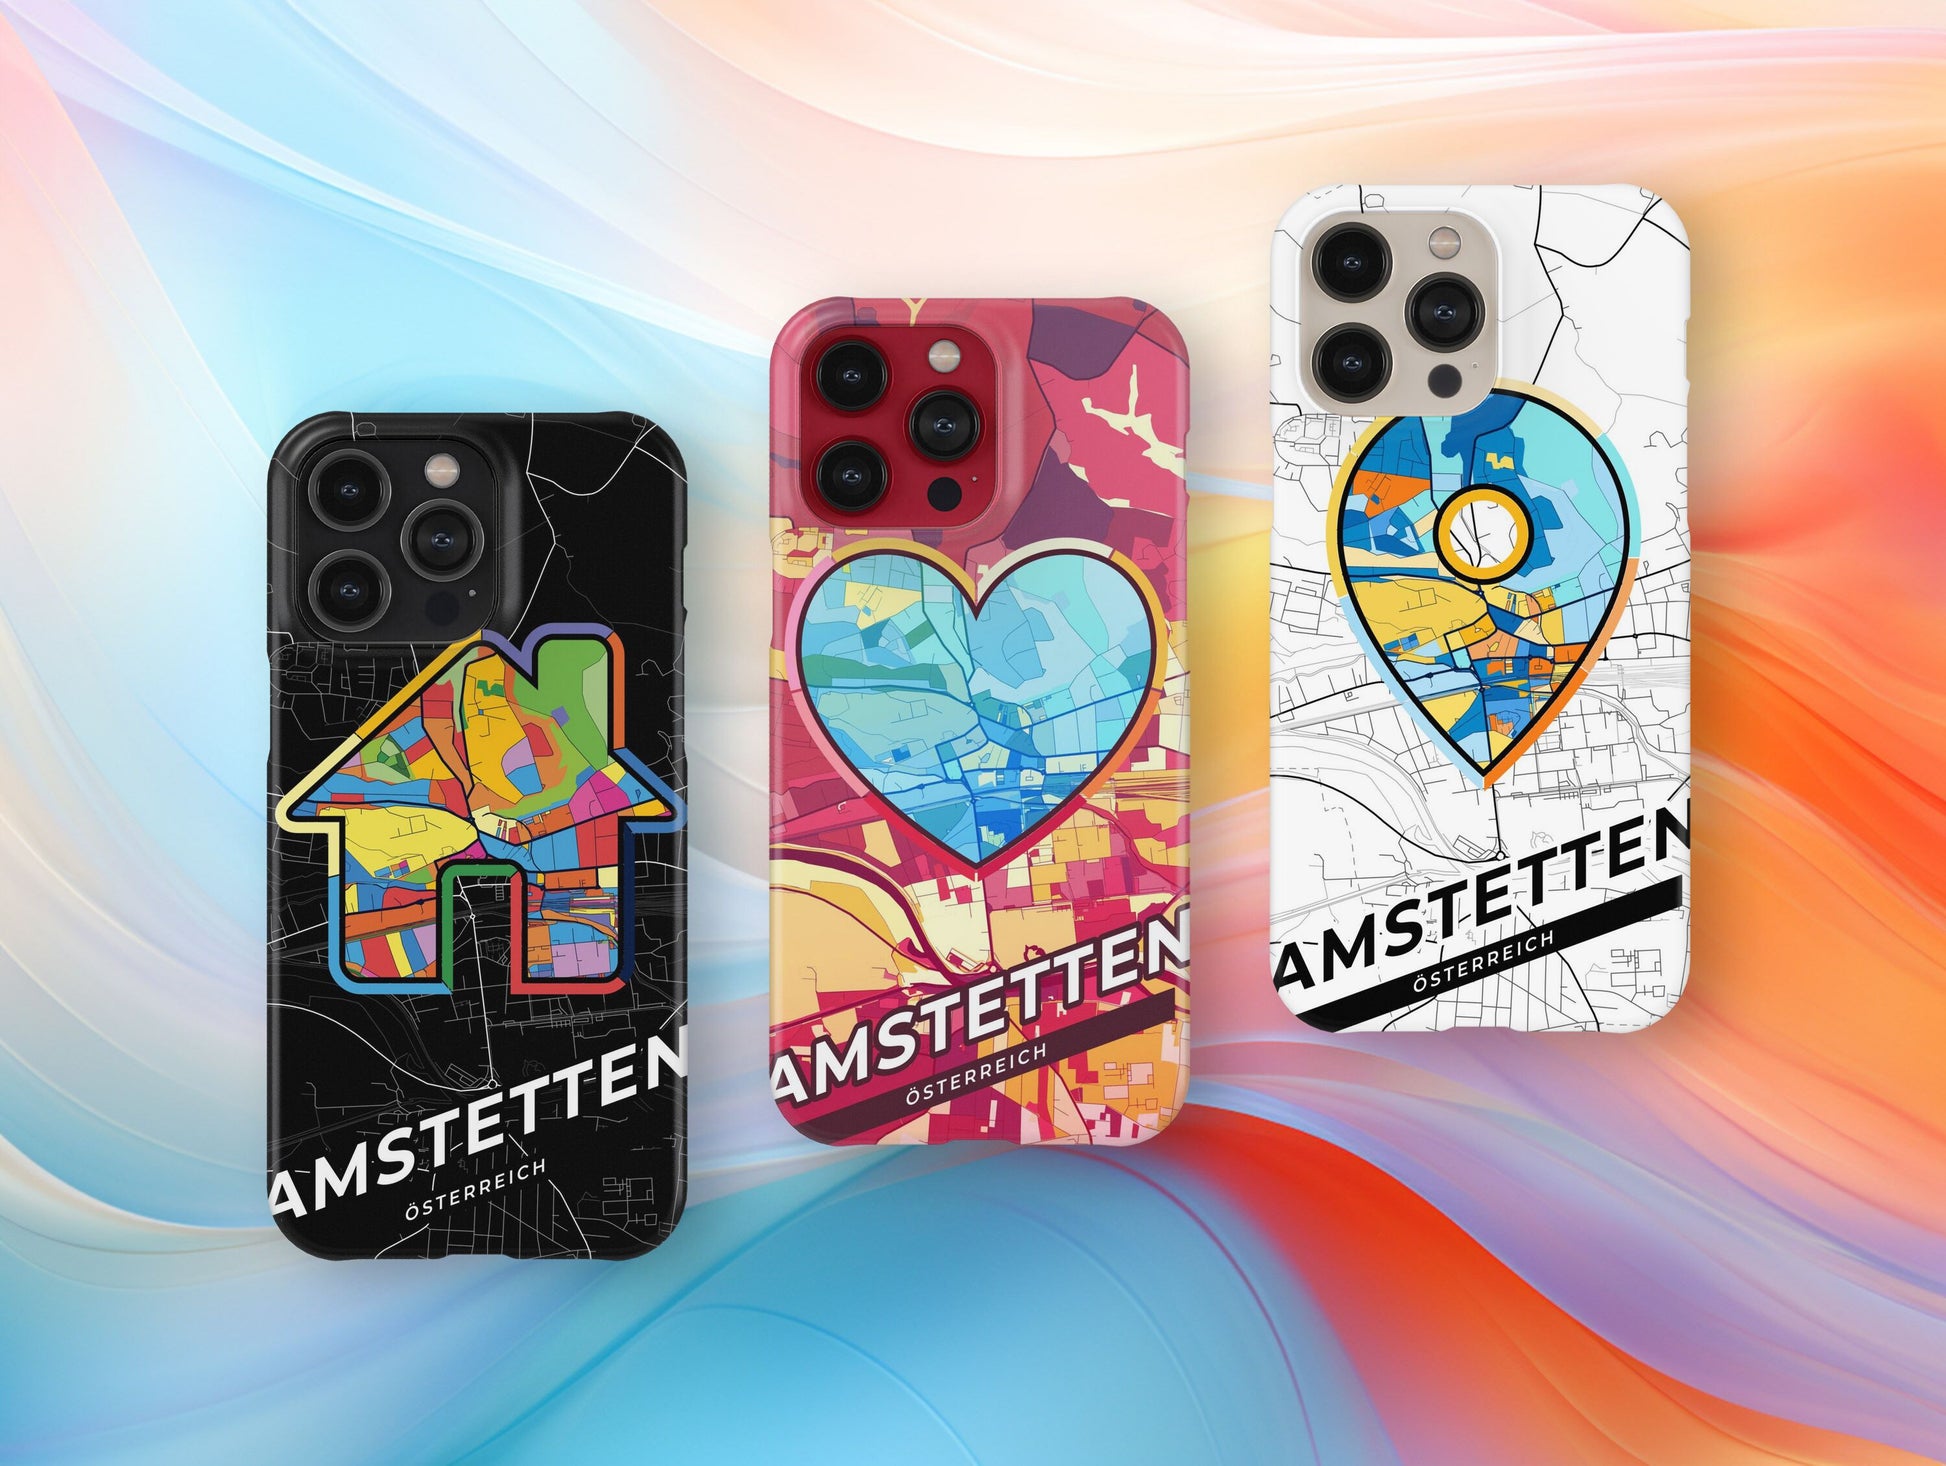 Amstetten Österreich slim phone case with colorful icon. Birthday, wedding or housewarming gift. Couple match cases.